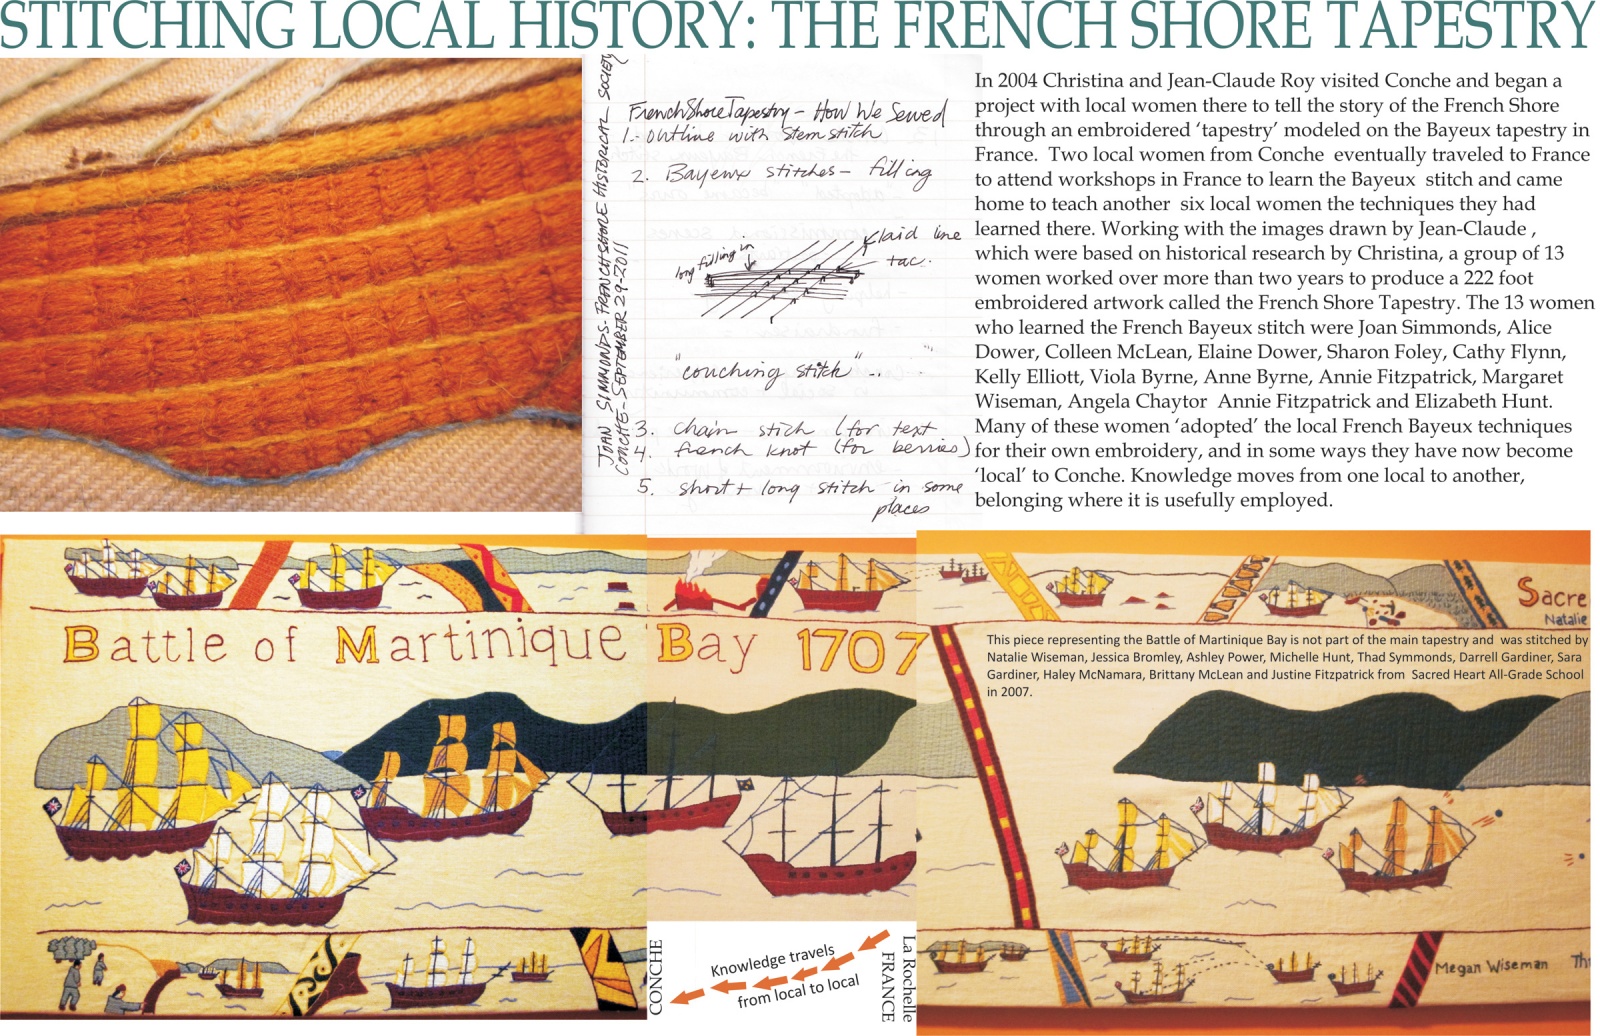 Stitching Local History: The French Shore Tapestry